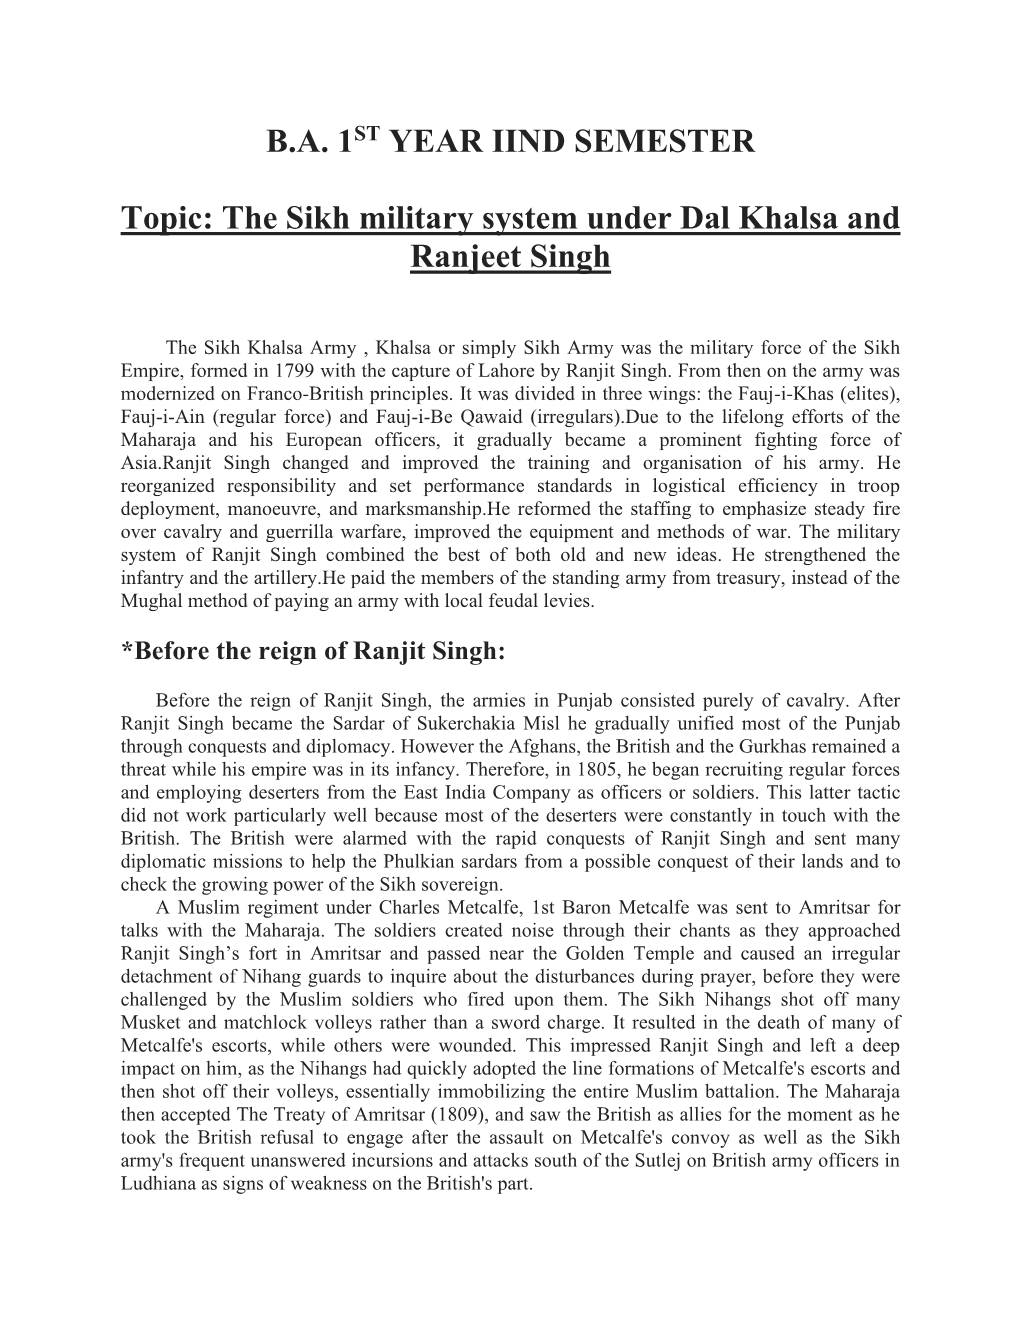 The Sikh Military System Under Dal Khalsa and Ranjeet Singh